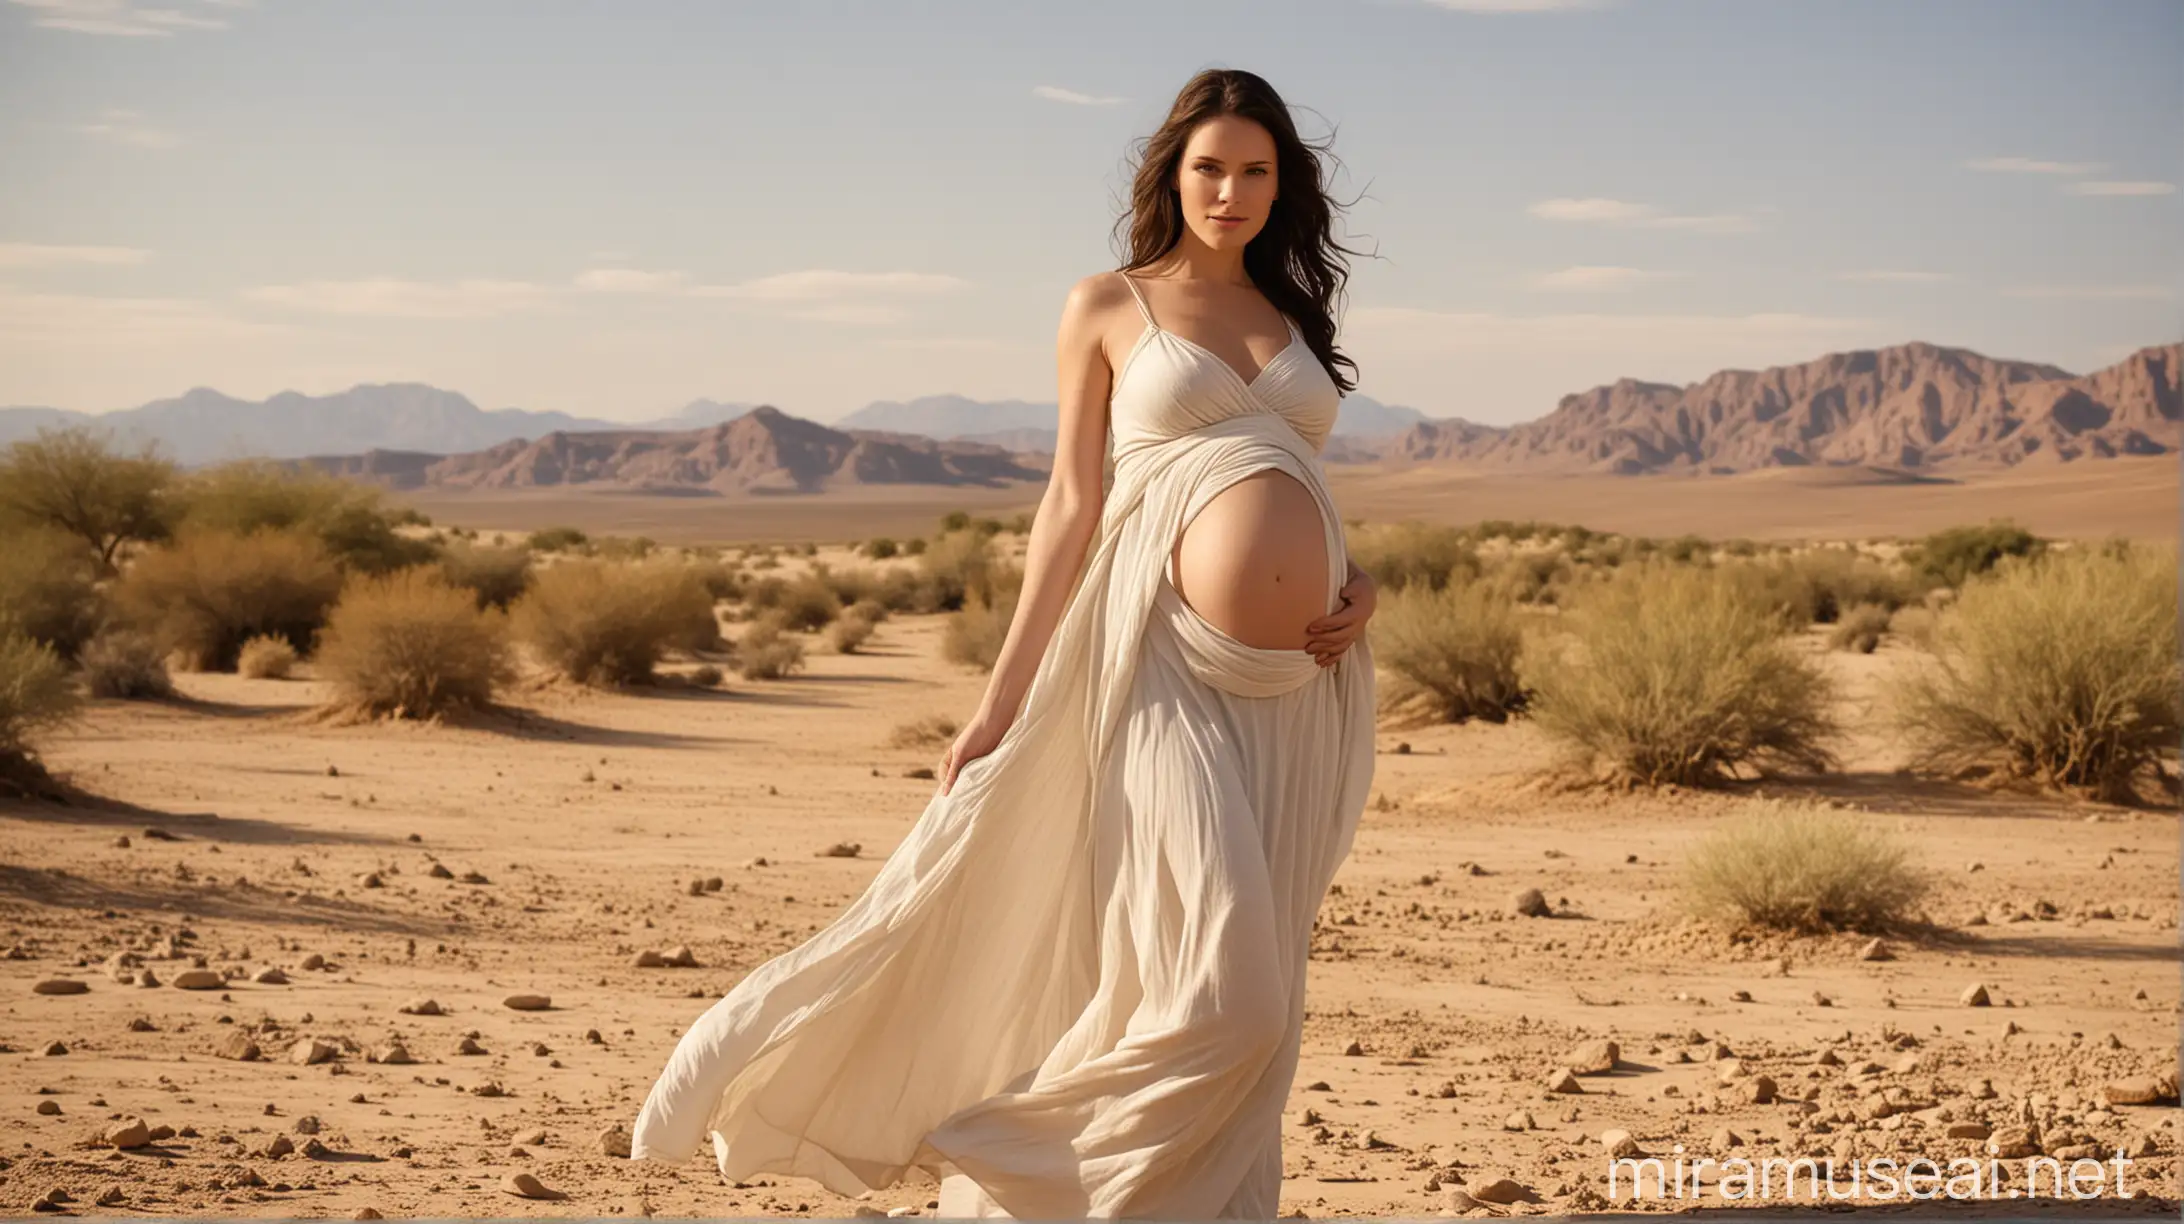 An Attractive pregnant woman, in a desert scene, during the era of the Biblical Moses